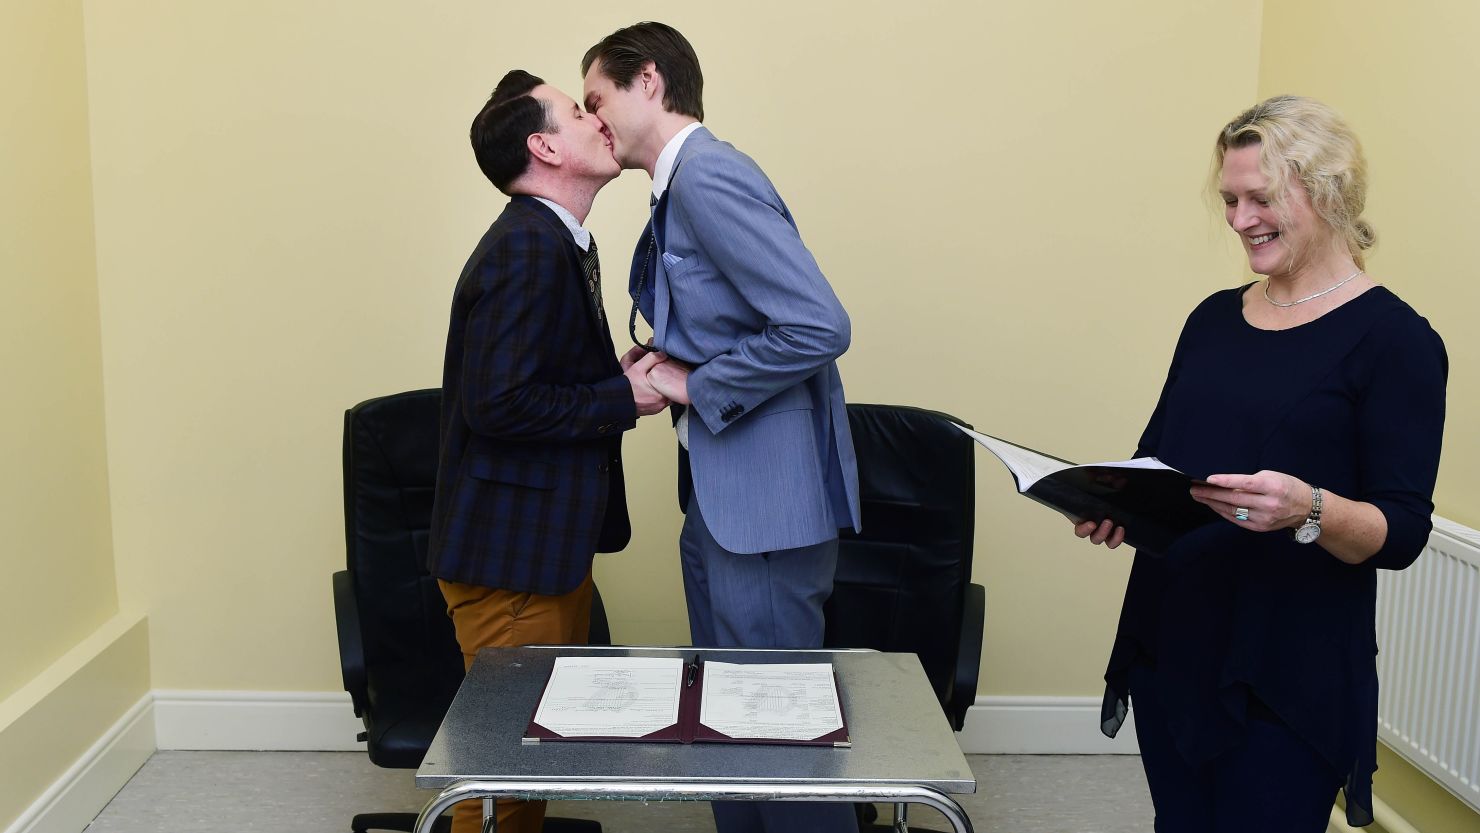 Richard Dowling, left, and Cormac Gollogly kiss after becoming the first same-sex couple to marry in Ireland on Tuesday, November 17.